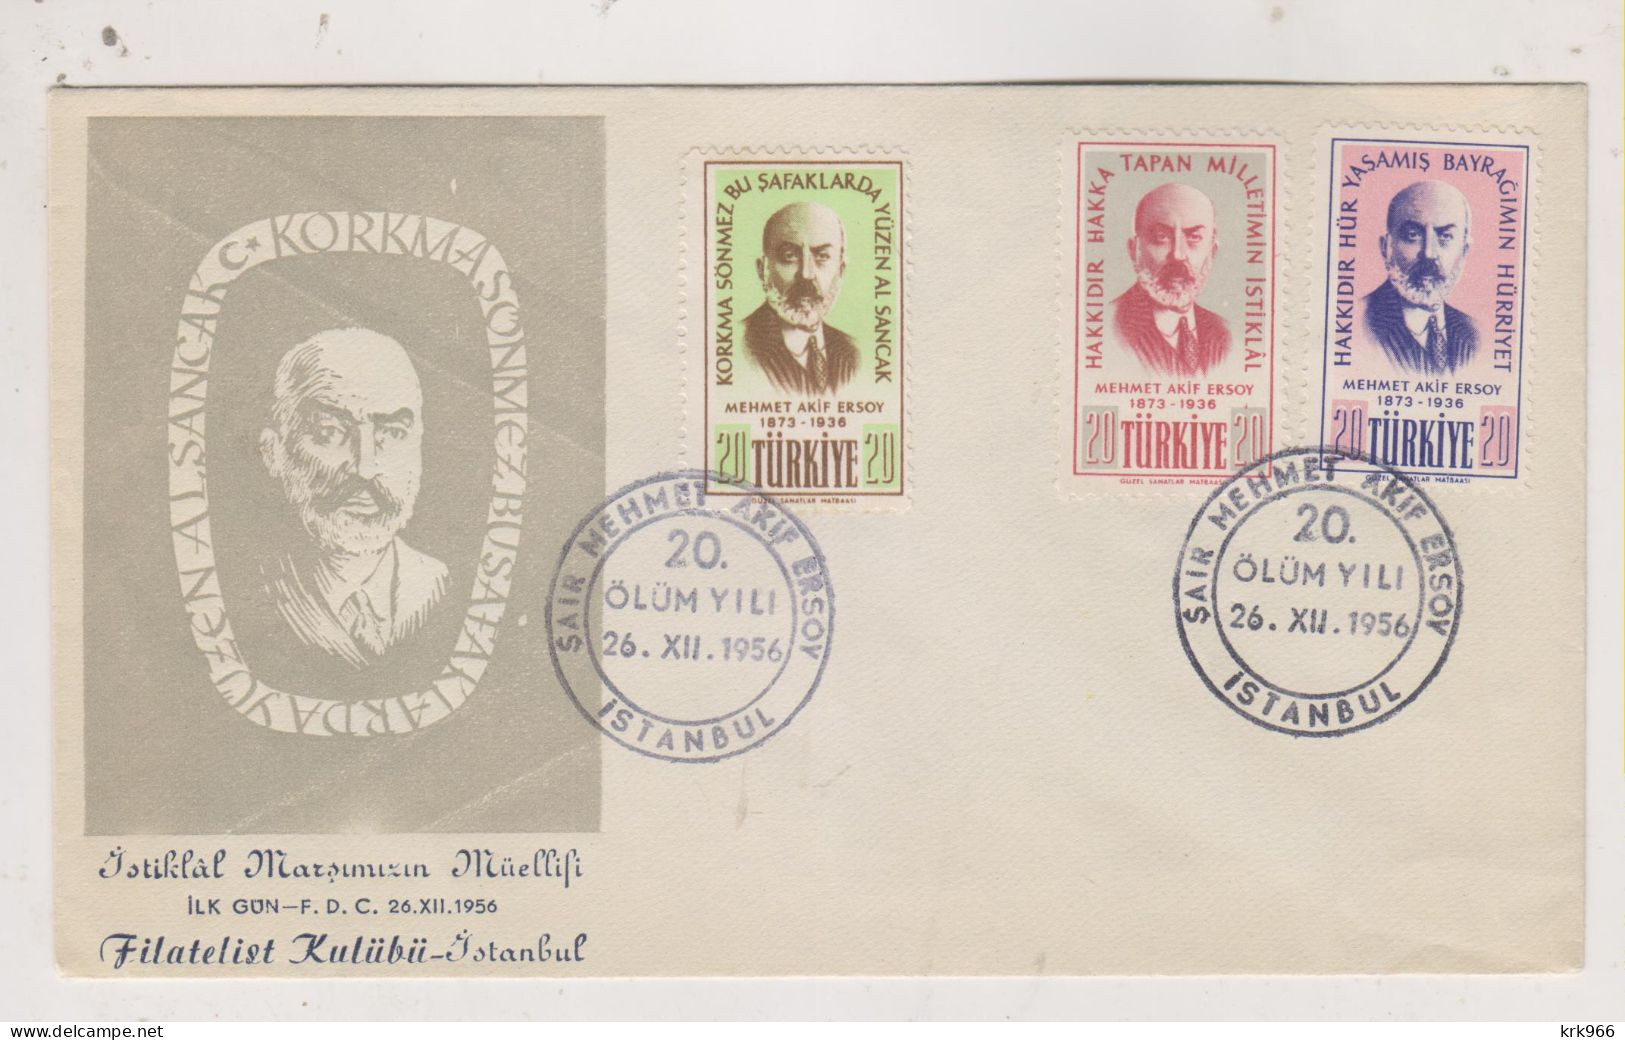 TURKEY  1956 ISTANBUL Nice FDC Cover - Covers & Documents